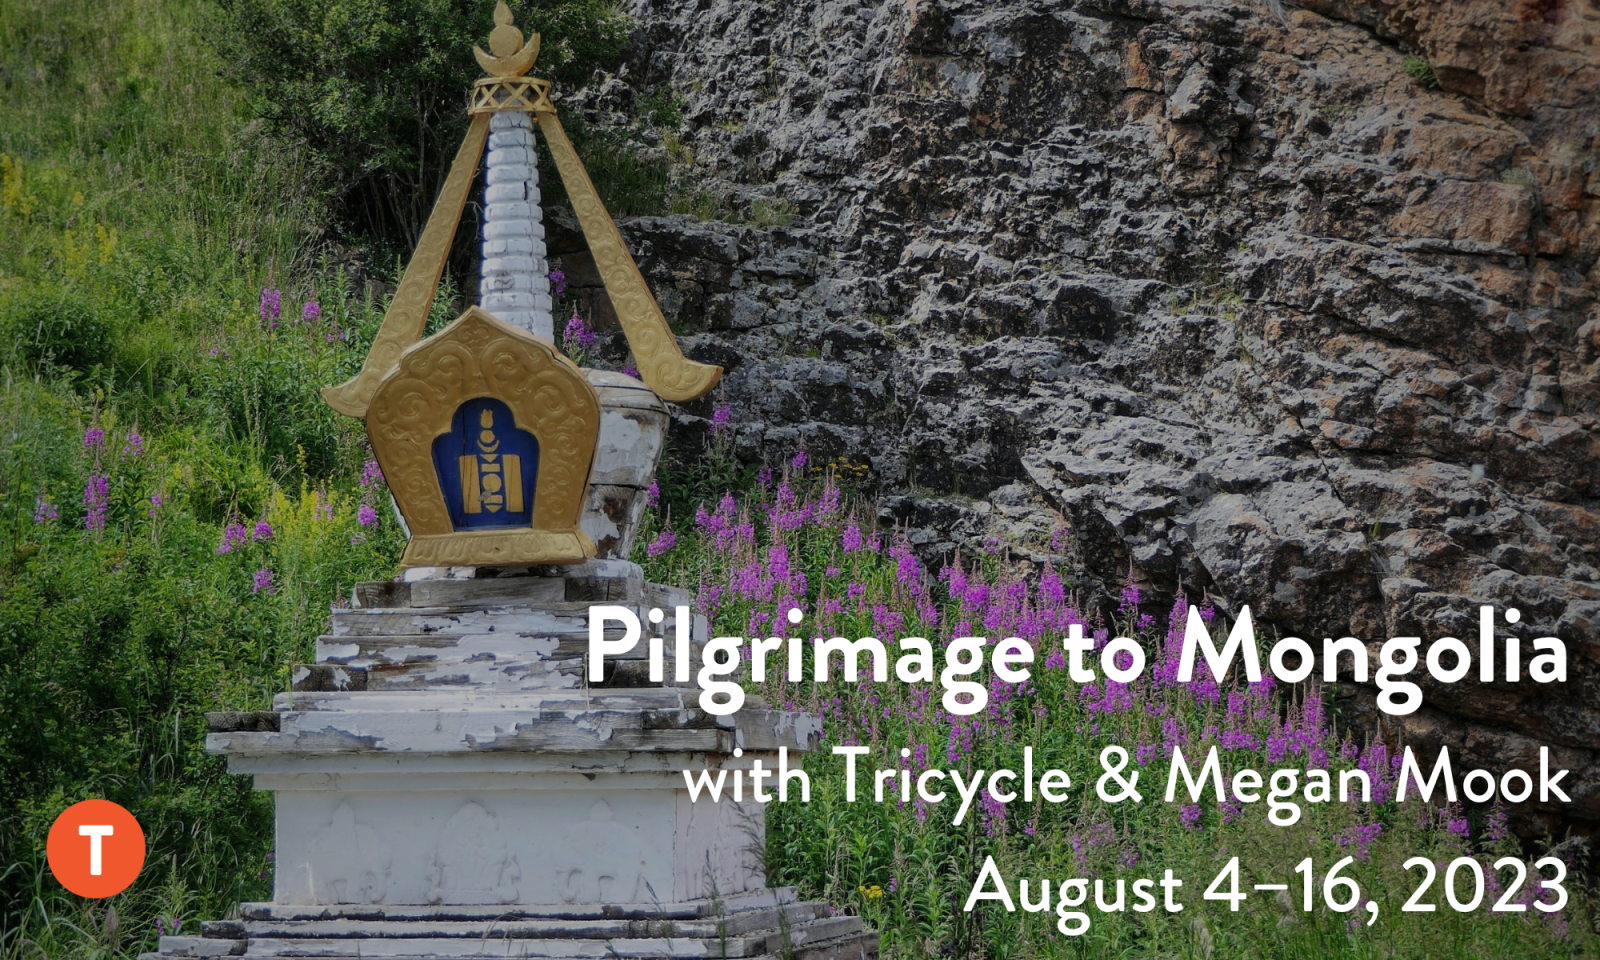 Pilgrimage to Mongolia with Tricycle and Megan Mook; August 4-16, 2023